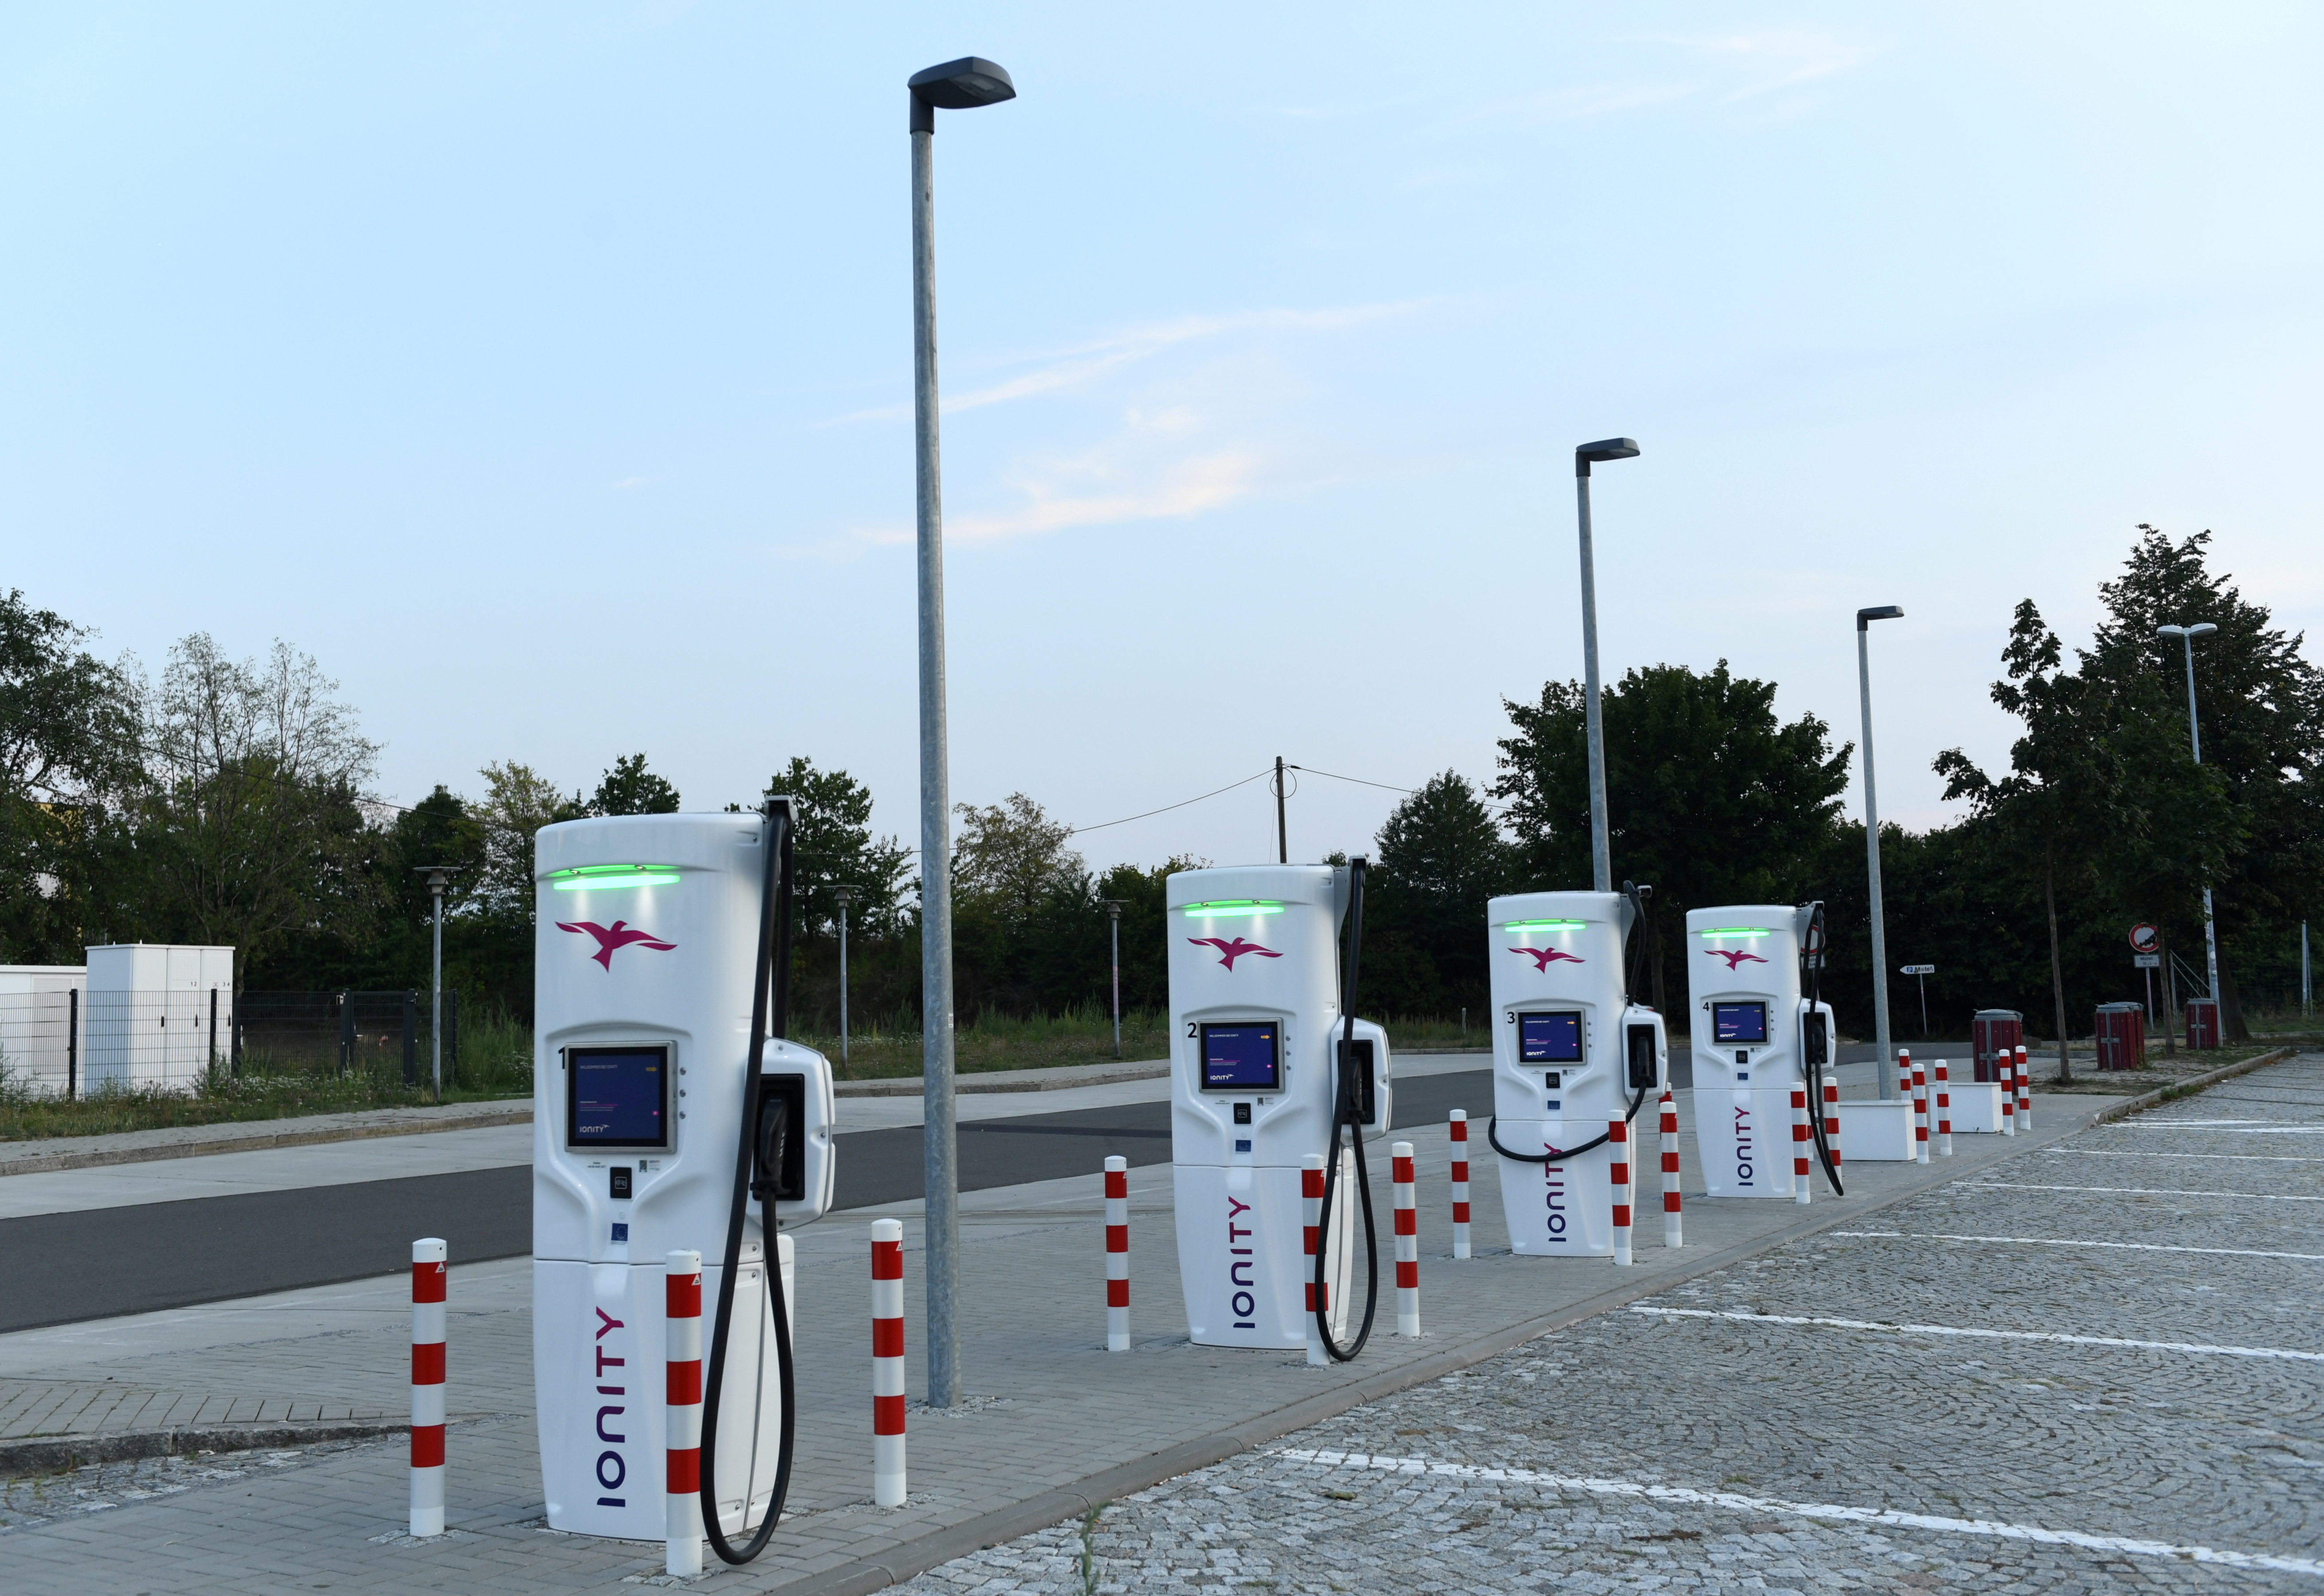 An Ionity electric vehicle charging station is pictured on the motorway service station 